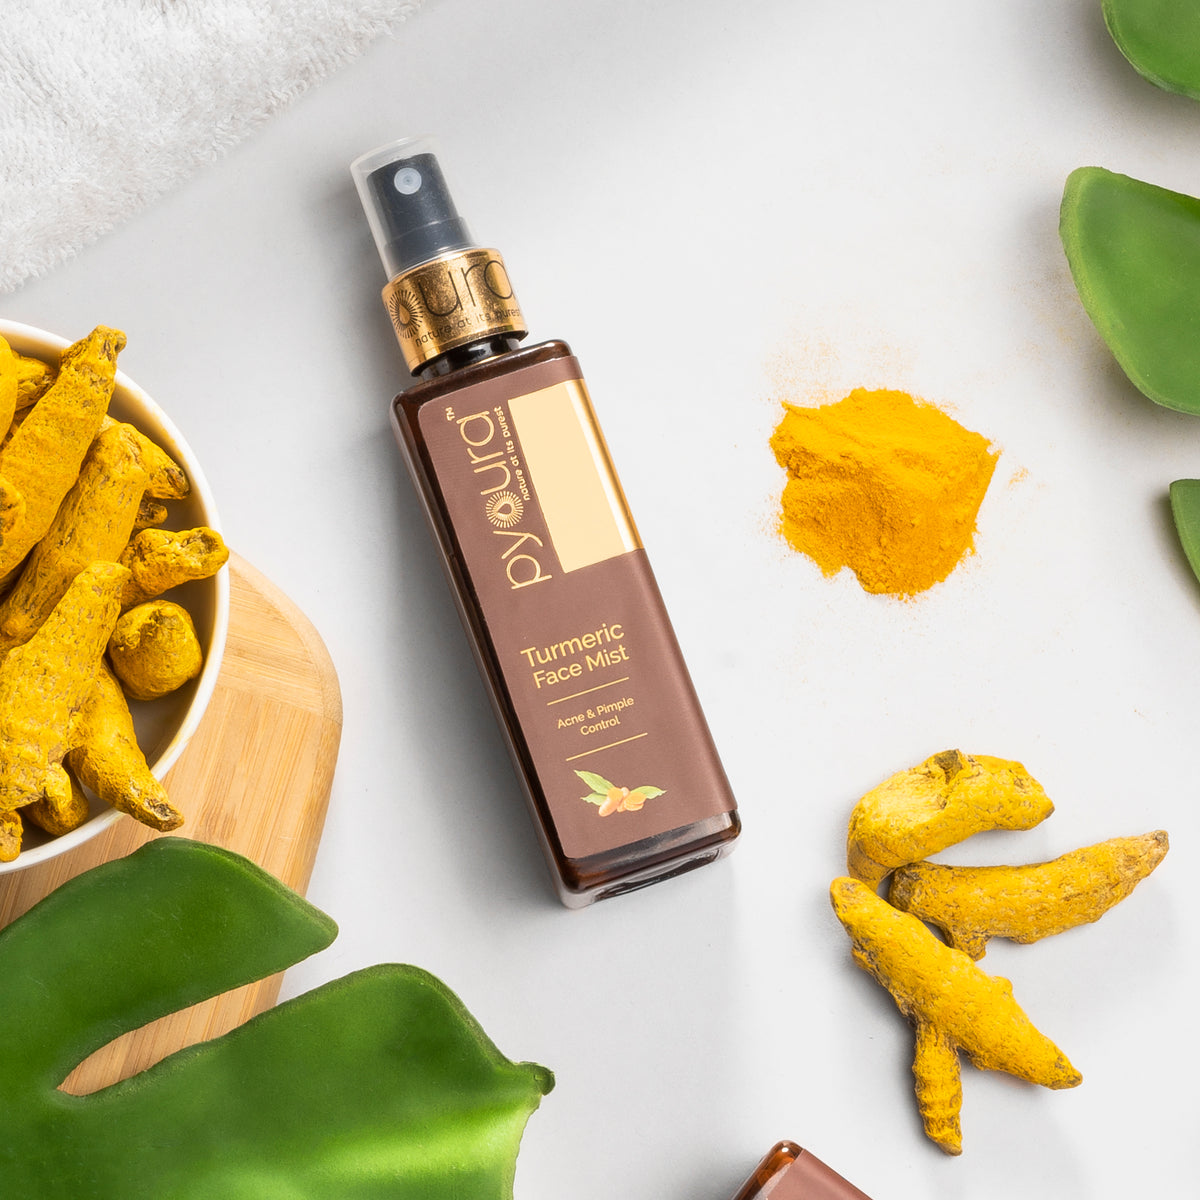 Turmeric + Tulsi + Neem Face Mist Combo <h4> A complete, easy-to-use skincare kit that keeps managing acne, pimples, fine lines and dark spots just a hydrating, alcohol and stain free spray away <h4> <h6>100 ml each Pack of 3<h6>